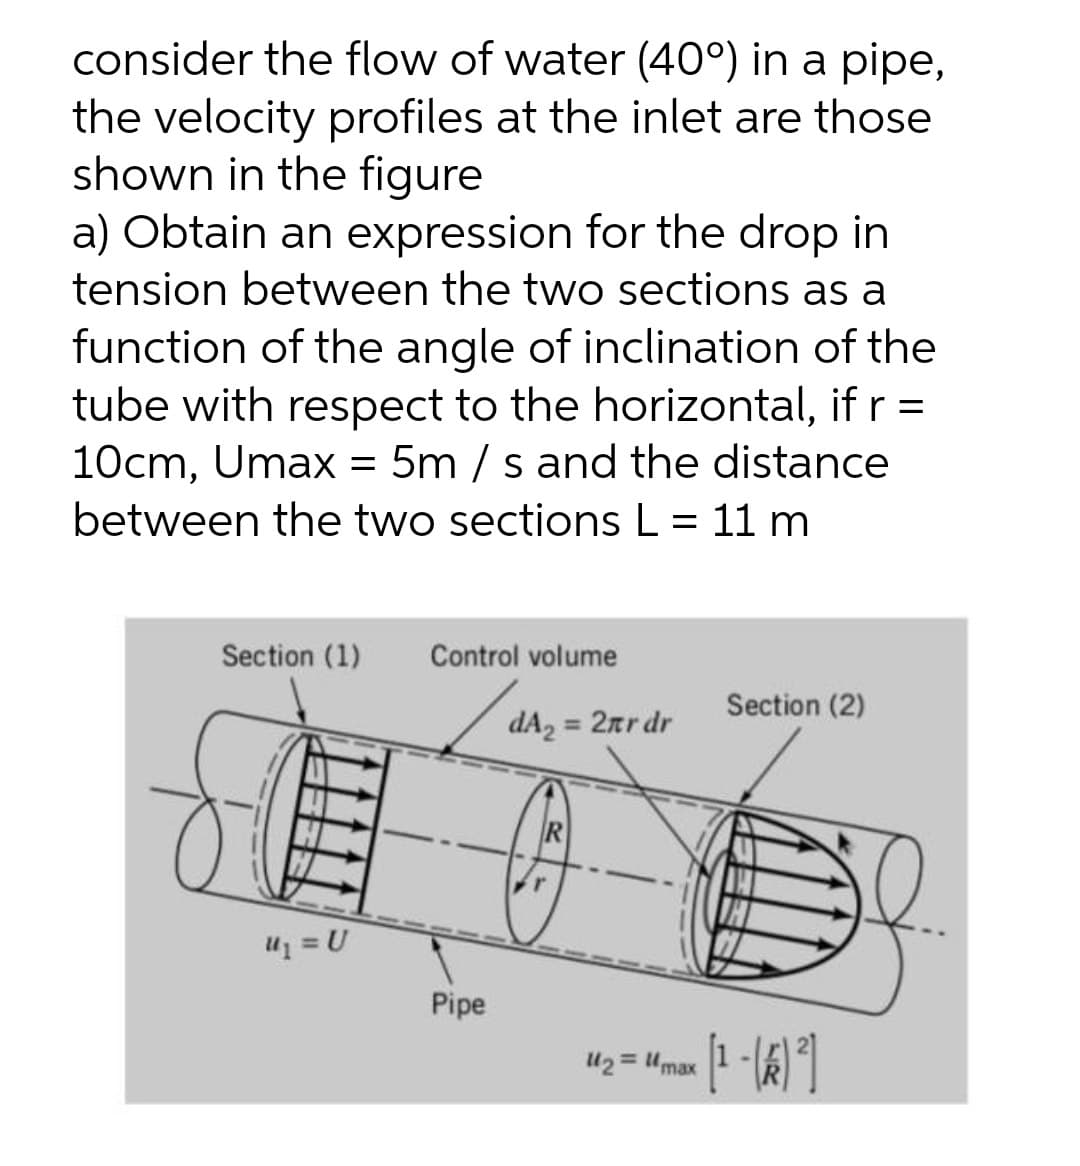 consider the flow of water (40°) in a pipe,
the velocity profiles at the inlet are those
shown in the figure
a) Obtain an expression for the drop in
tension between the two sections as a
function of the angle of inclination of the
tube with respect to the horizontal, if r =
10cm, Umax = 5m / s and the distance
between the two sections L = 11 m
Section (1)
Control volume
Section (2)
dA2 = 2rr dr
%3D
Pipe
U2 = Umax 1-k1
%3D
